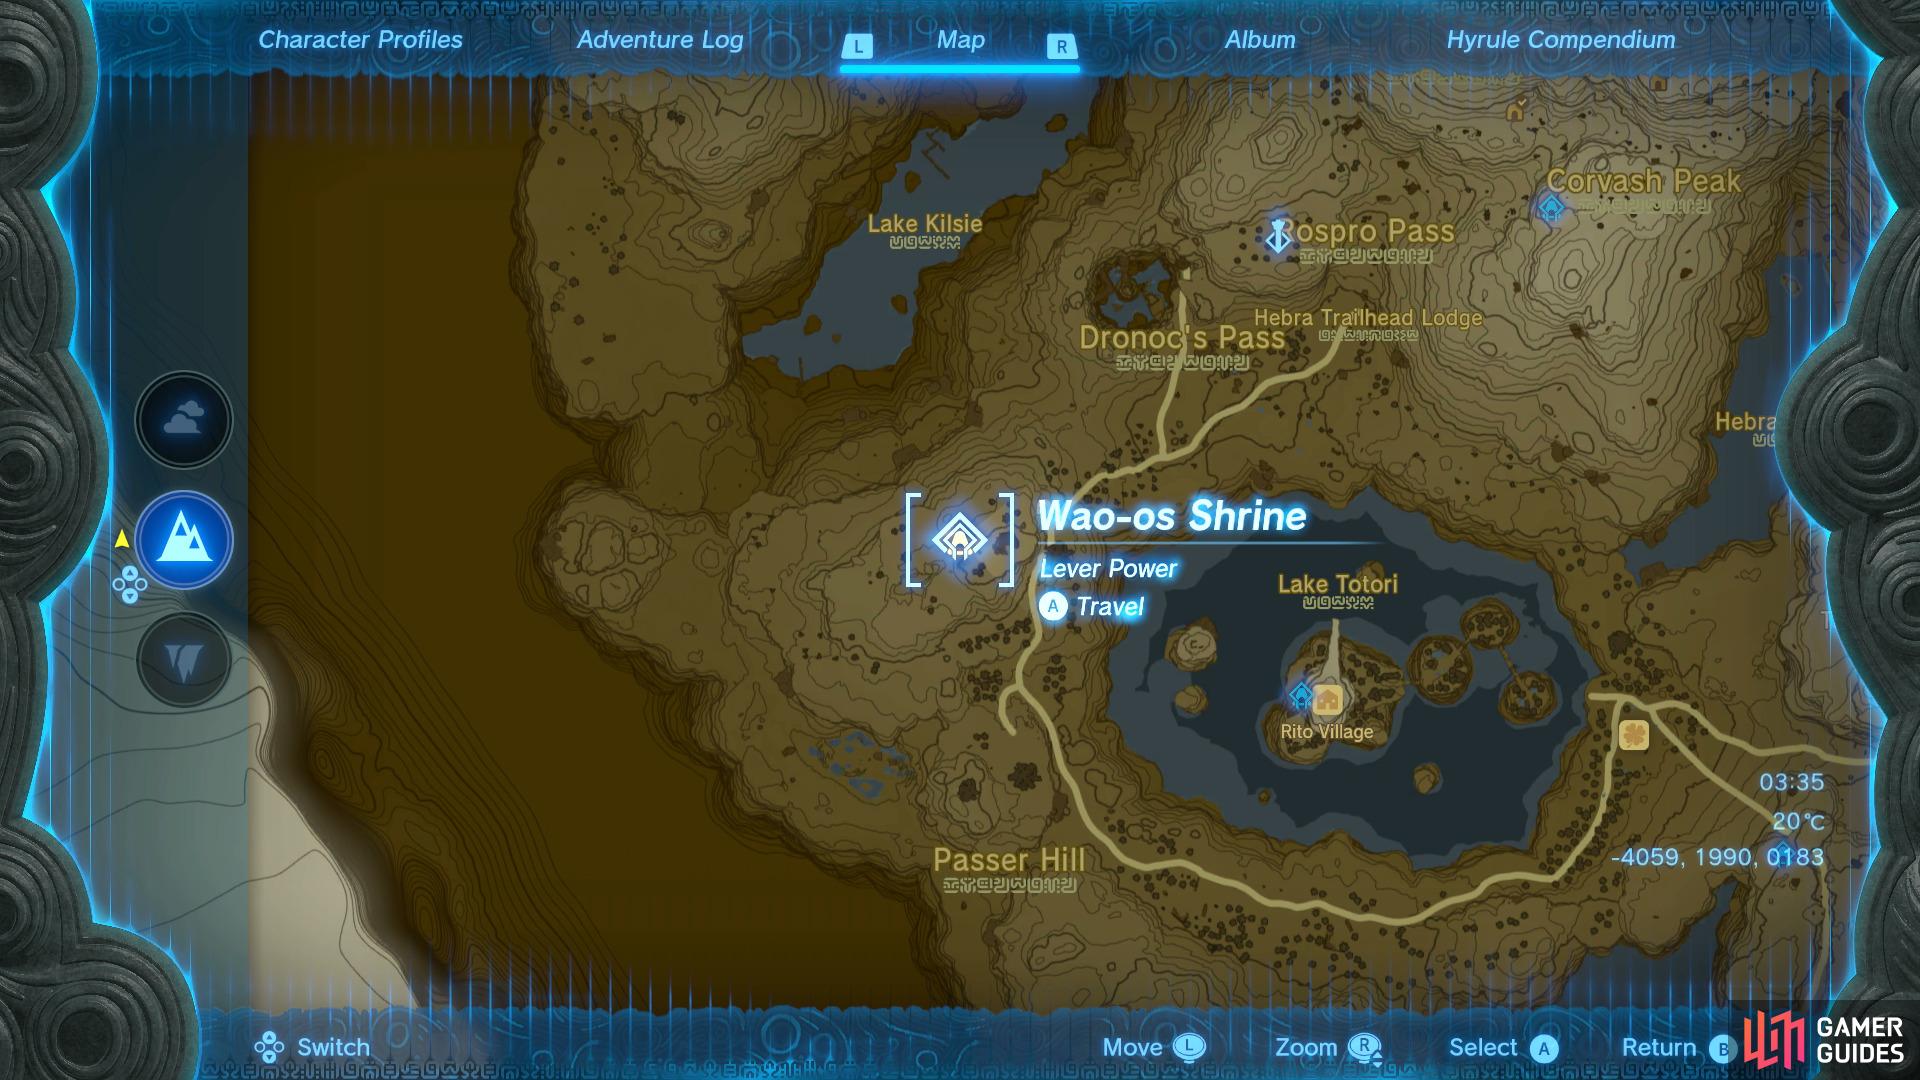 Head to this location on the map to find the Wao-os Shrine.